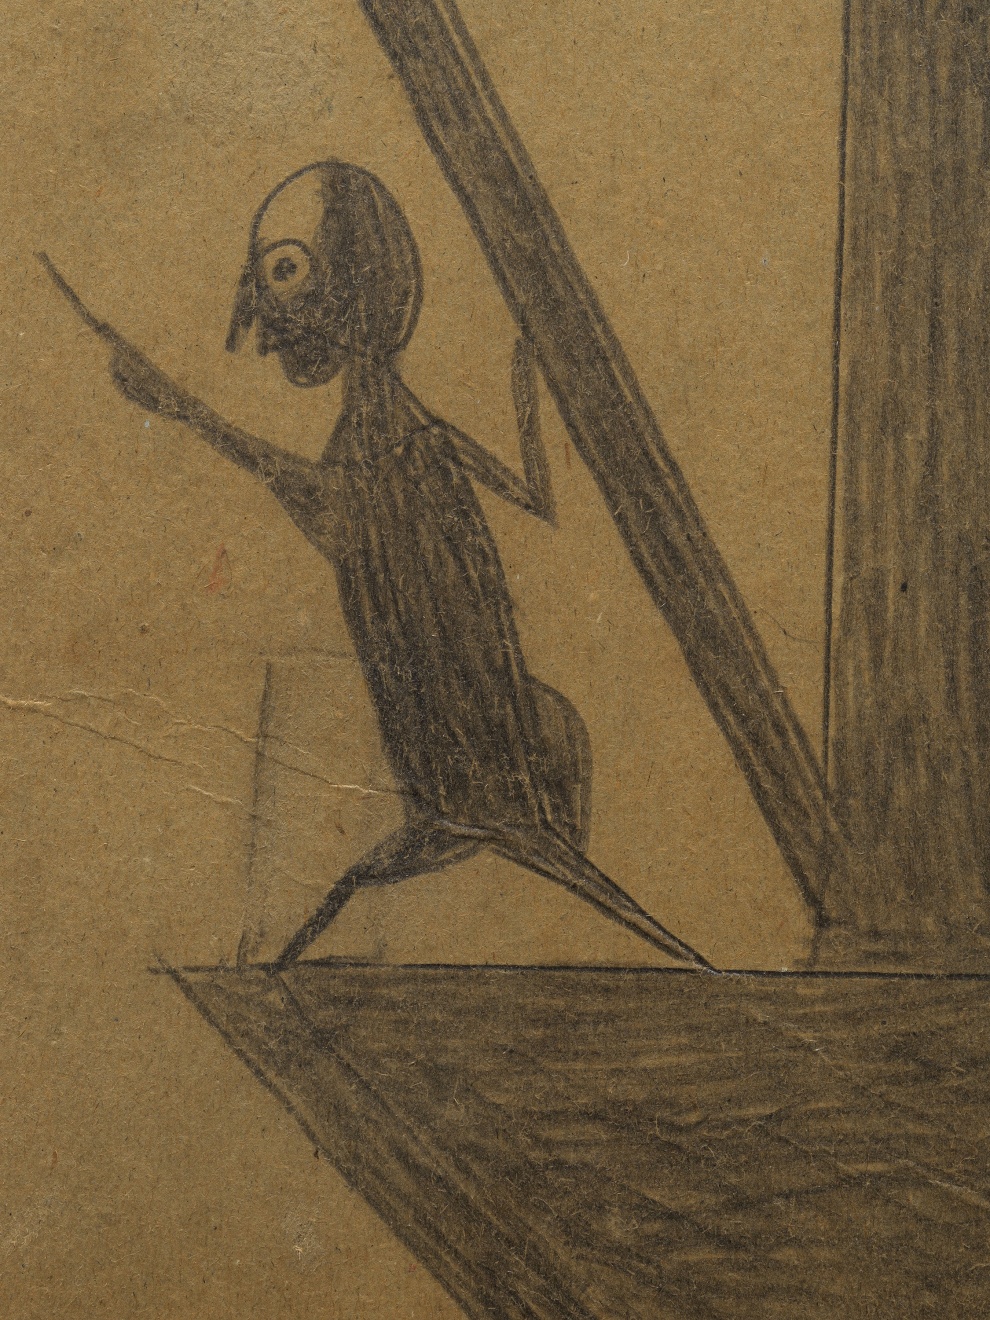 Bill Traylor, Untitled (Figures/Construction), c. 1939 - 1942